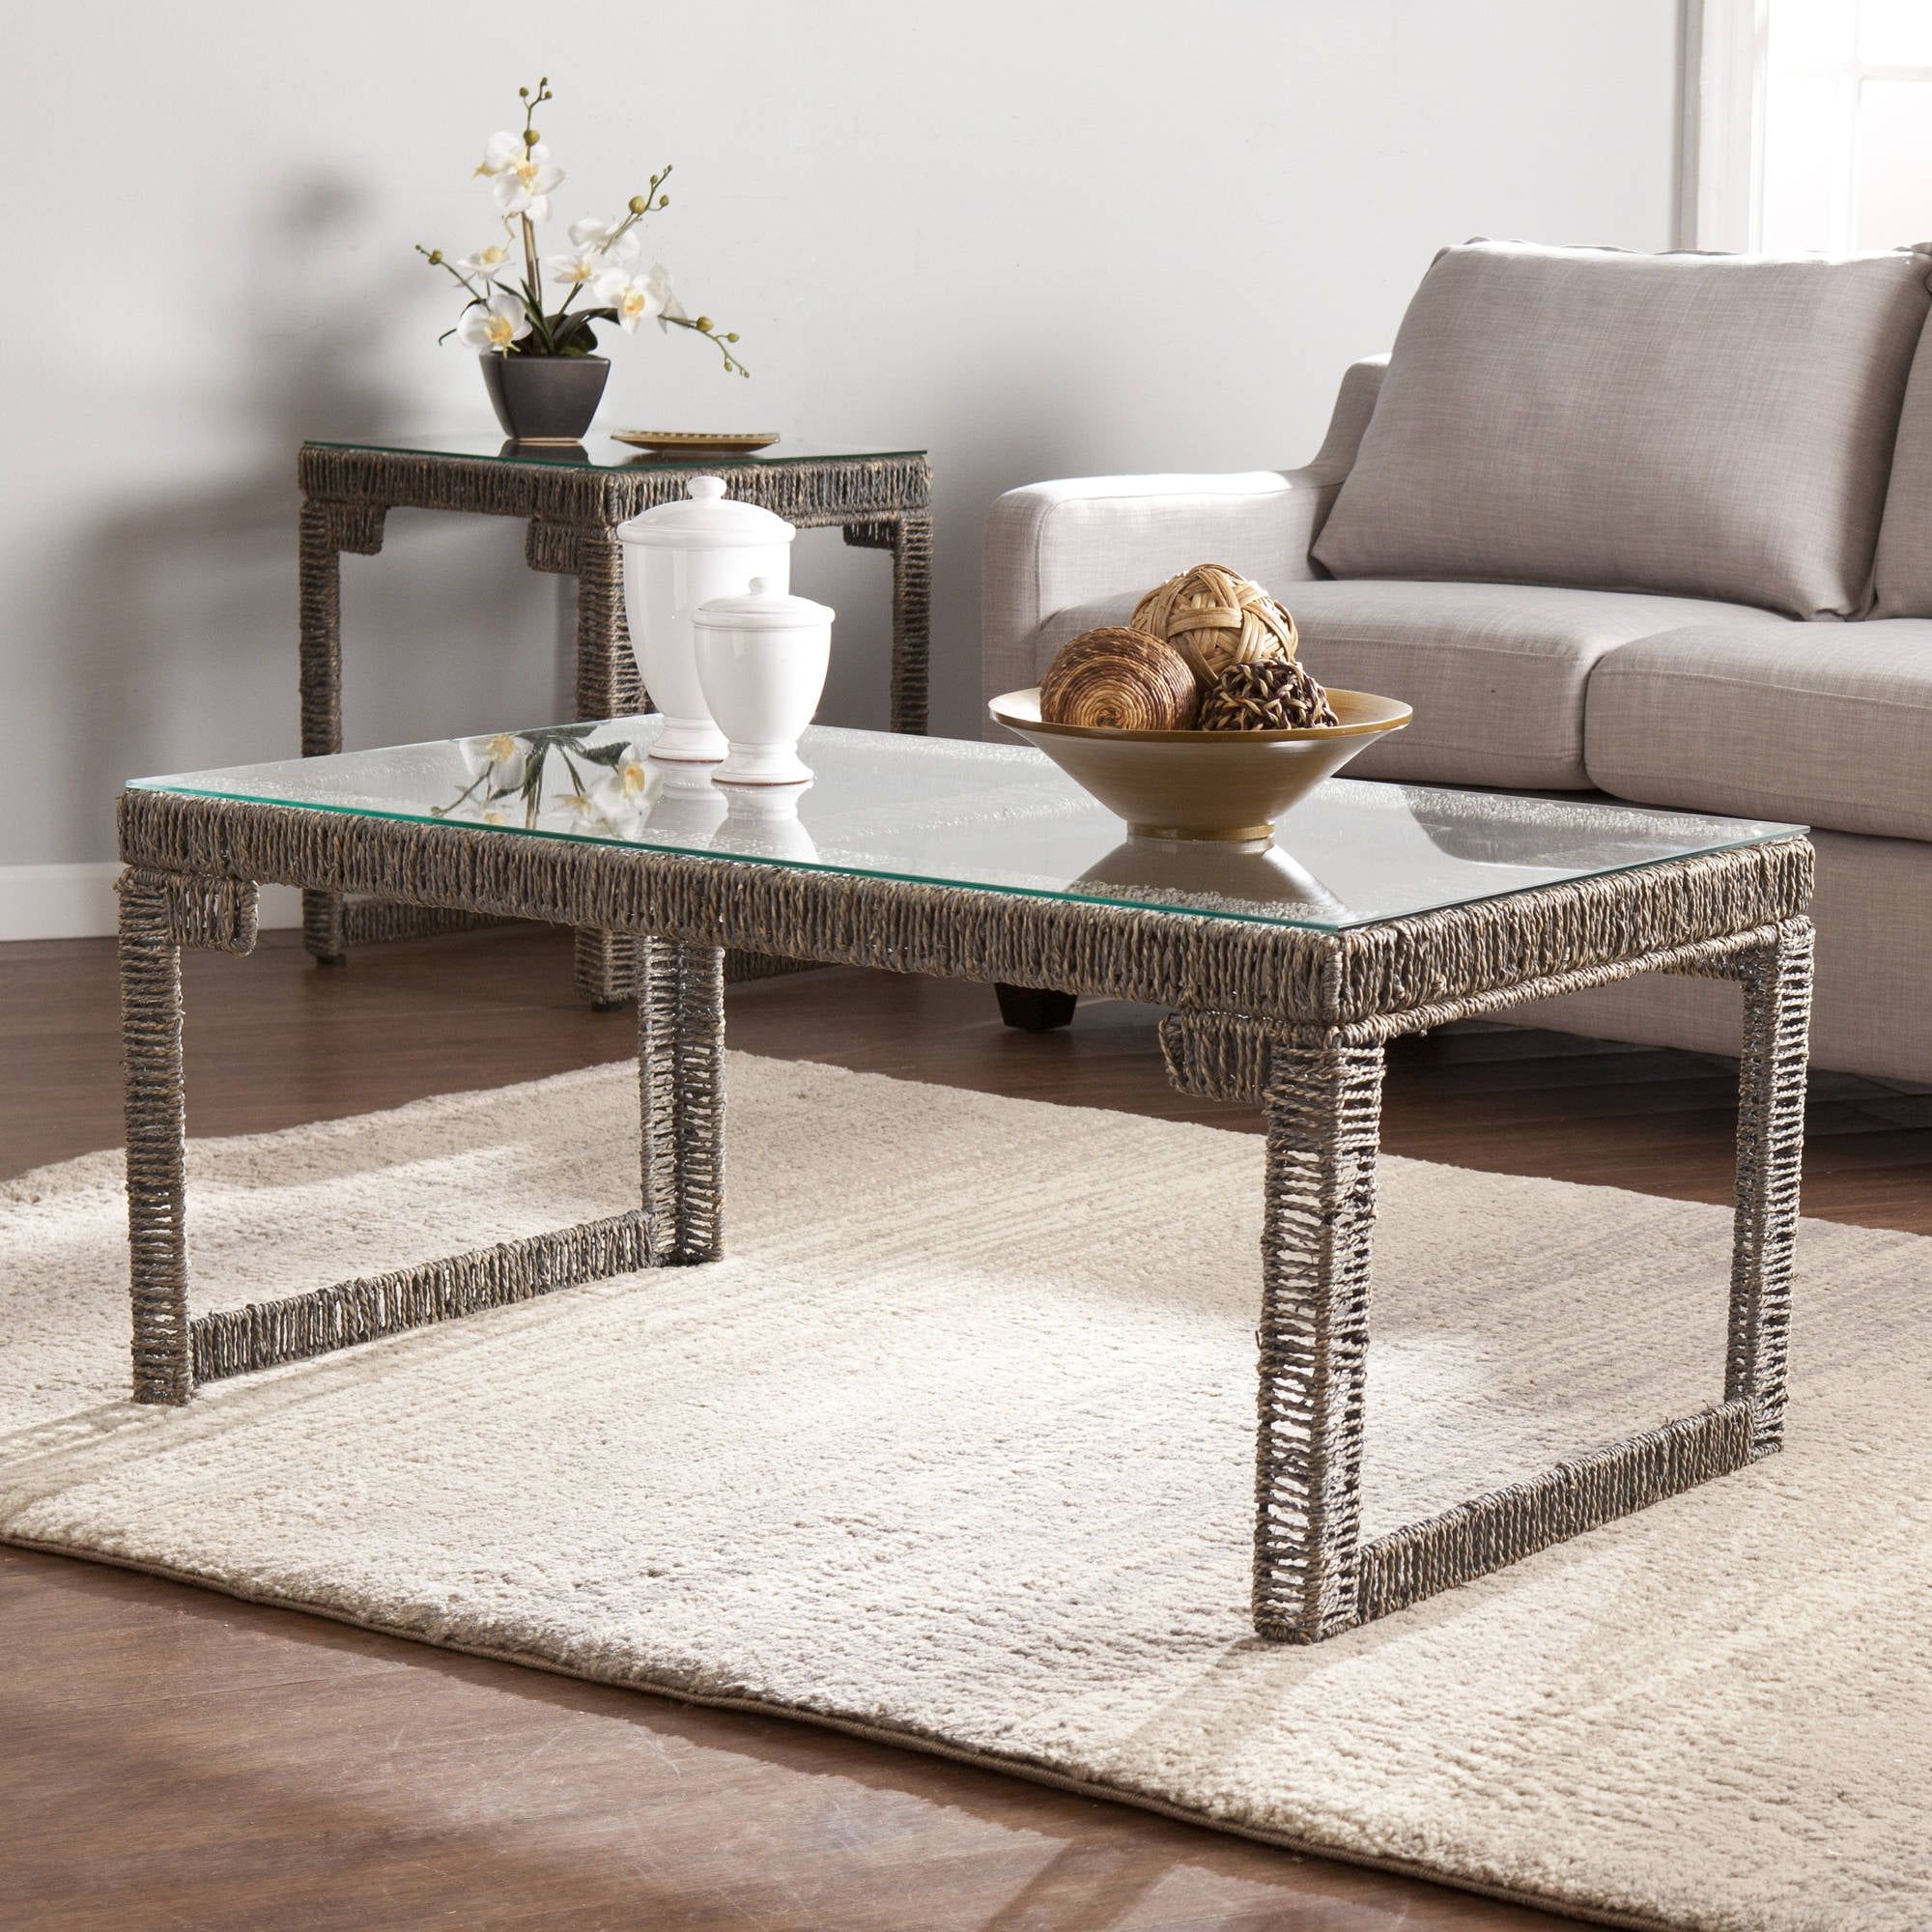 Southern Enterprises Arayes Hyacinth And Glass Coffee Table, Gray Regarding Southern Enterprises Larksmill Coffee Tables (View 16 of 20)